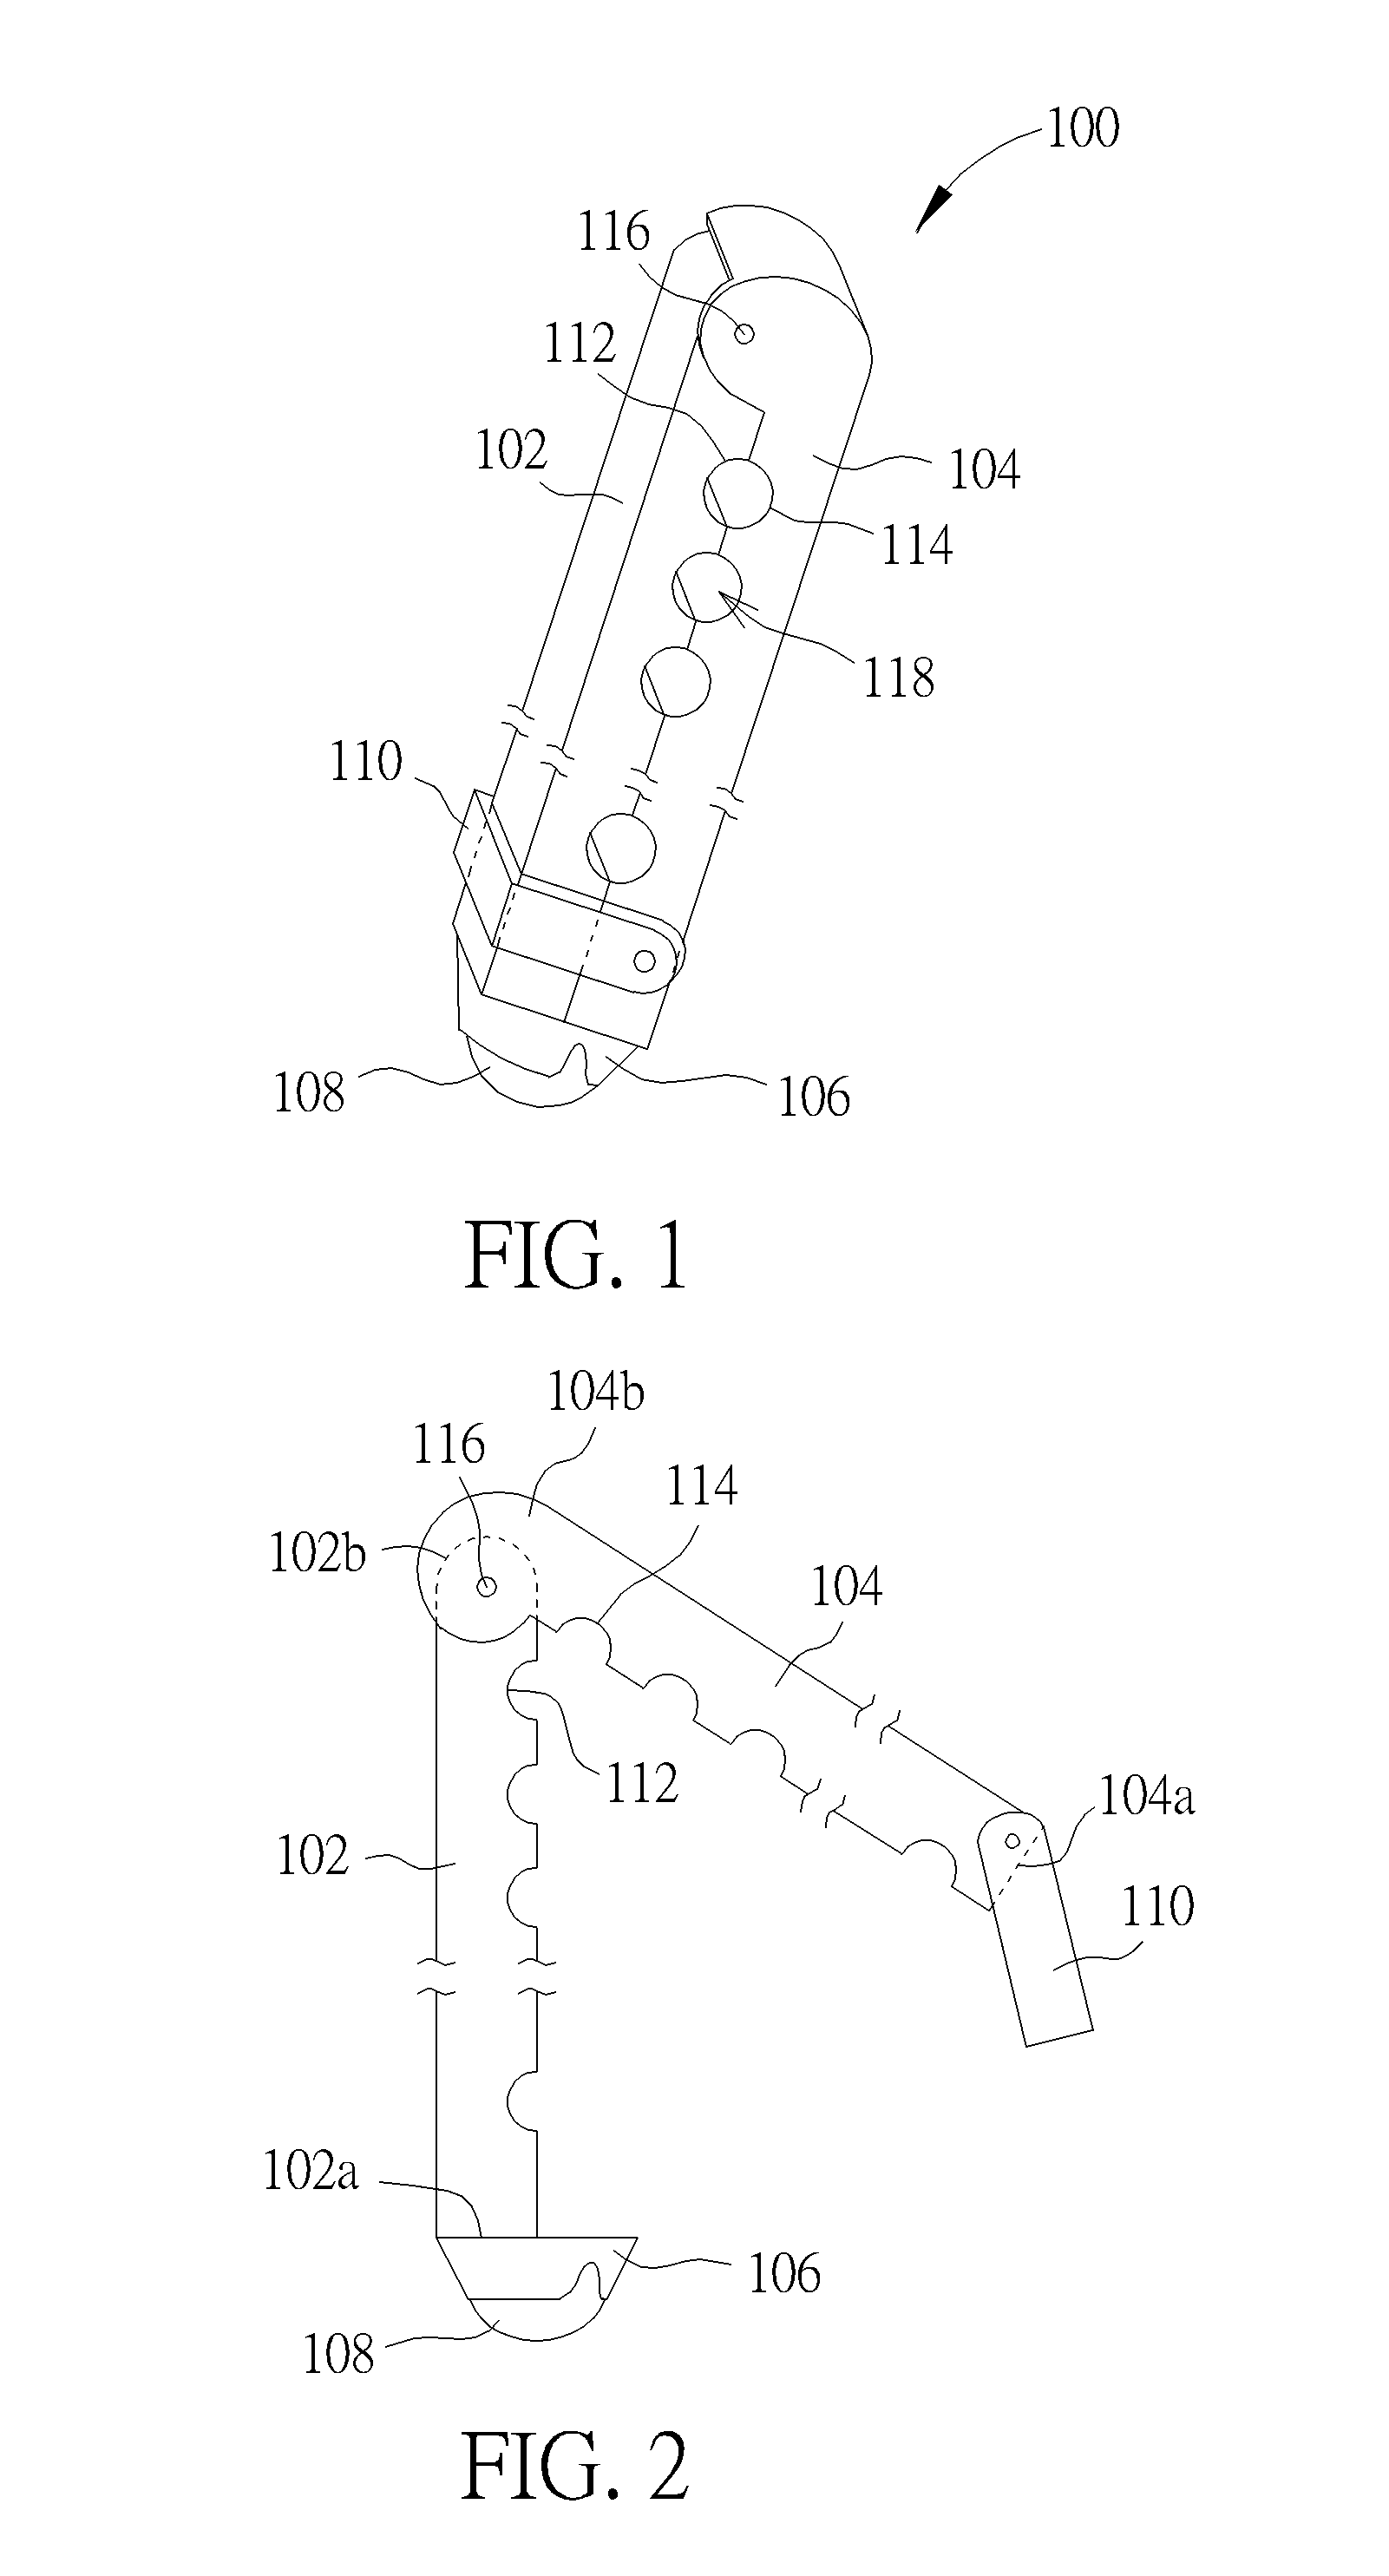 Supporting assembly and method for using the same